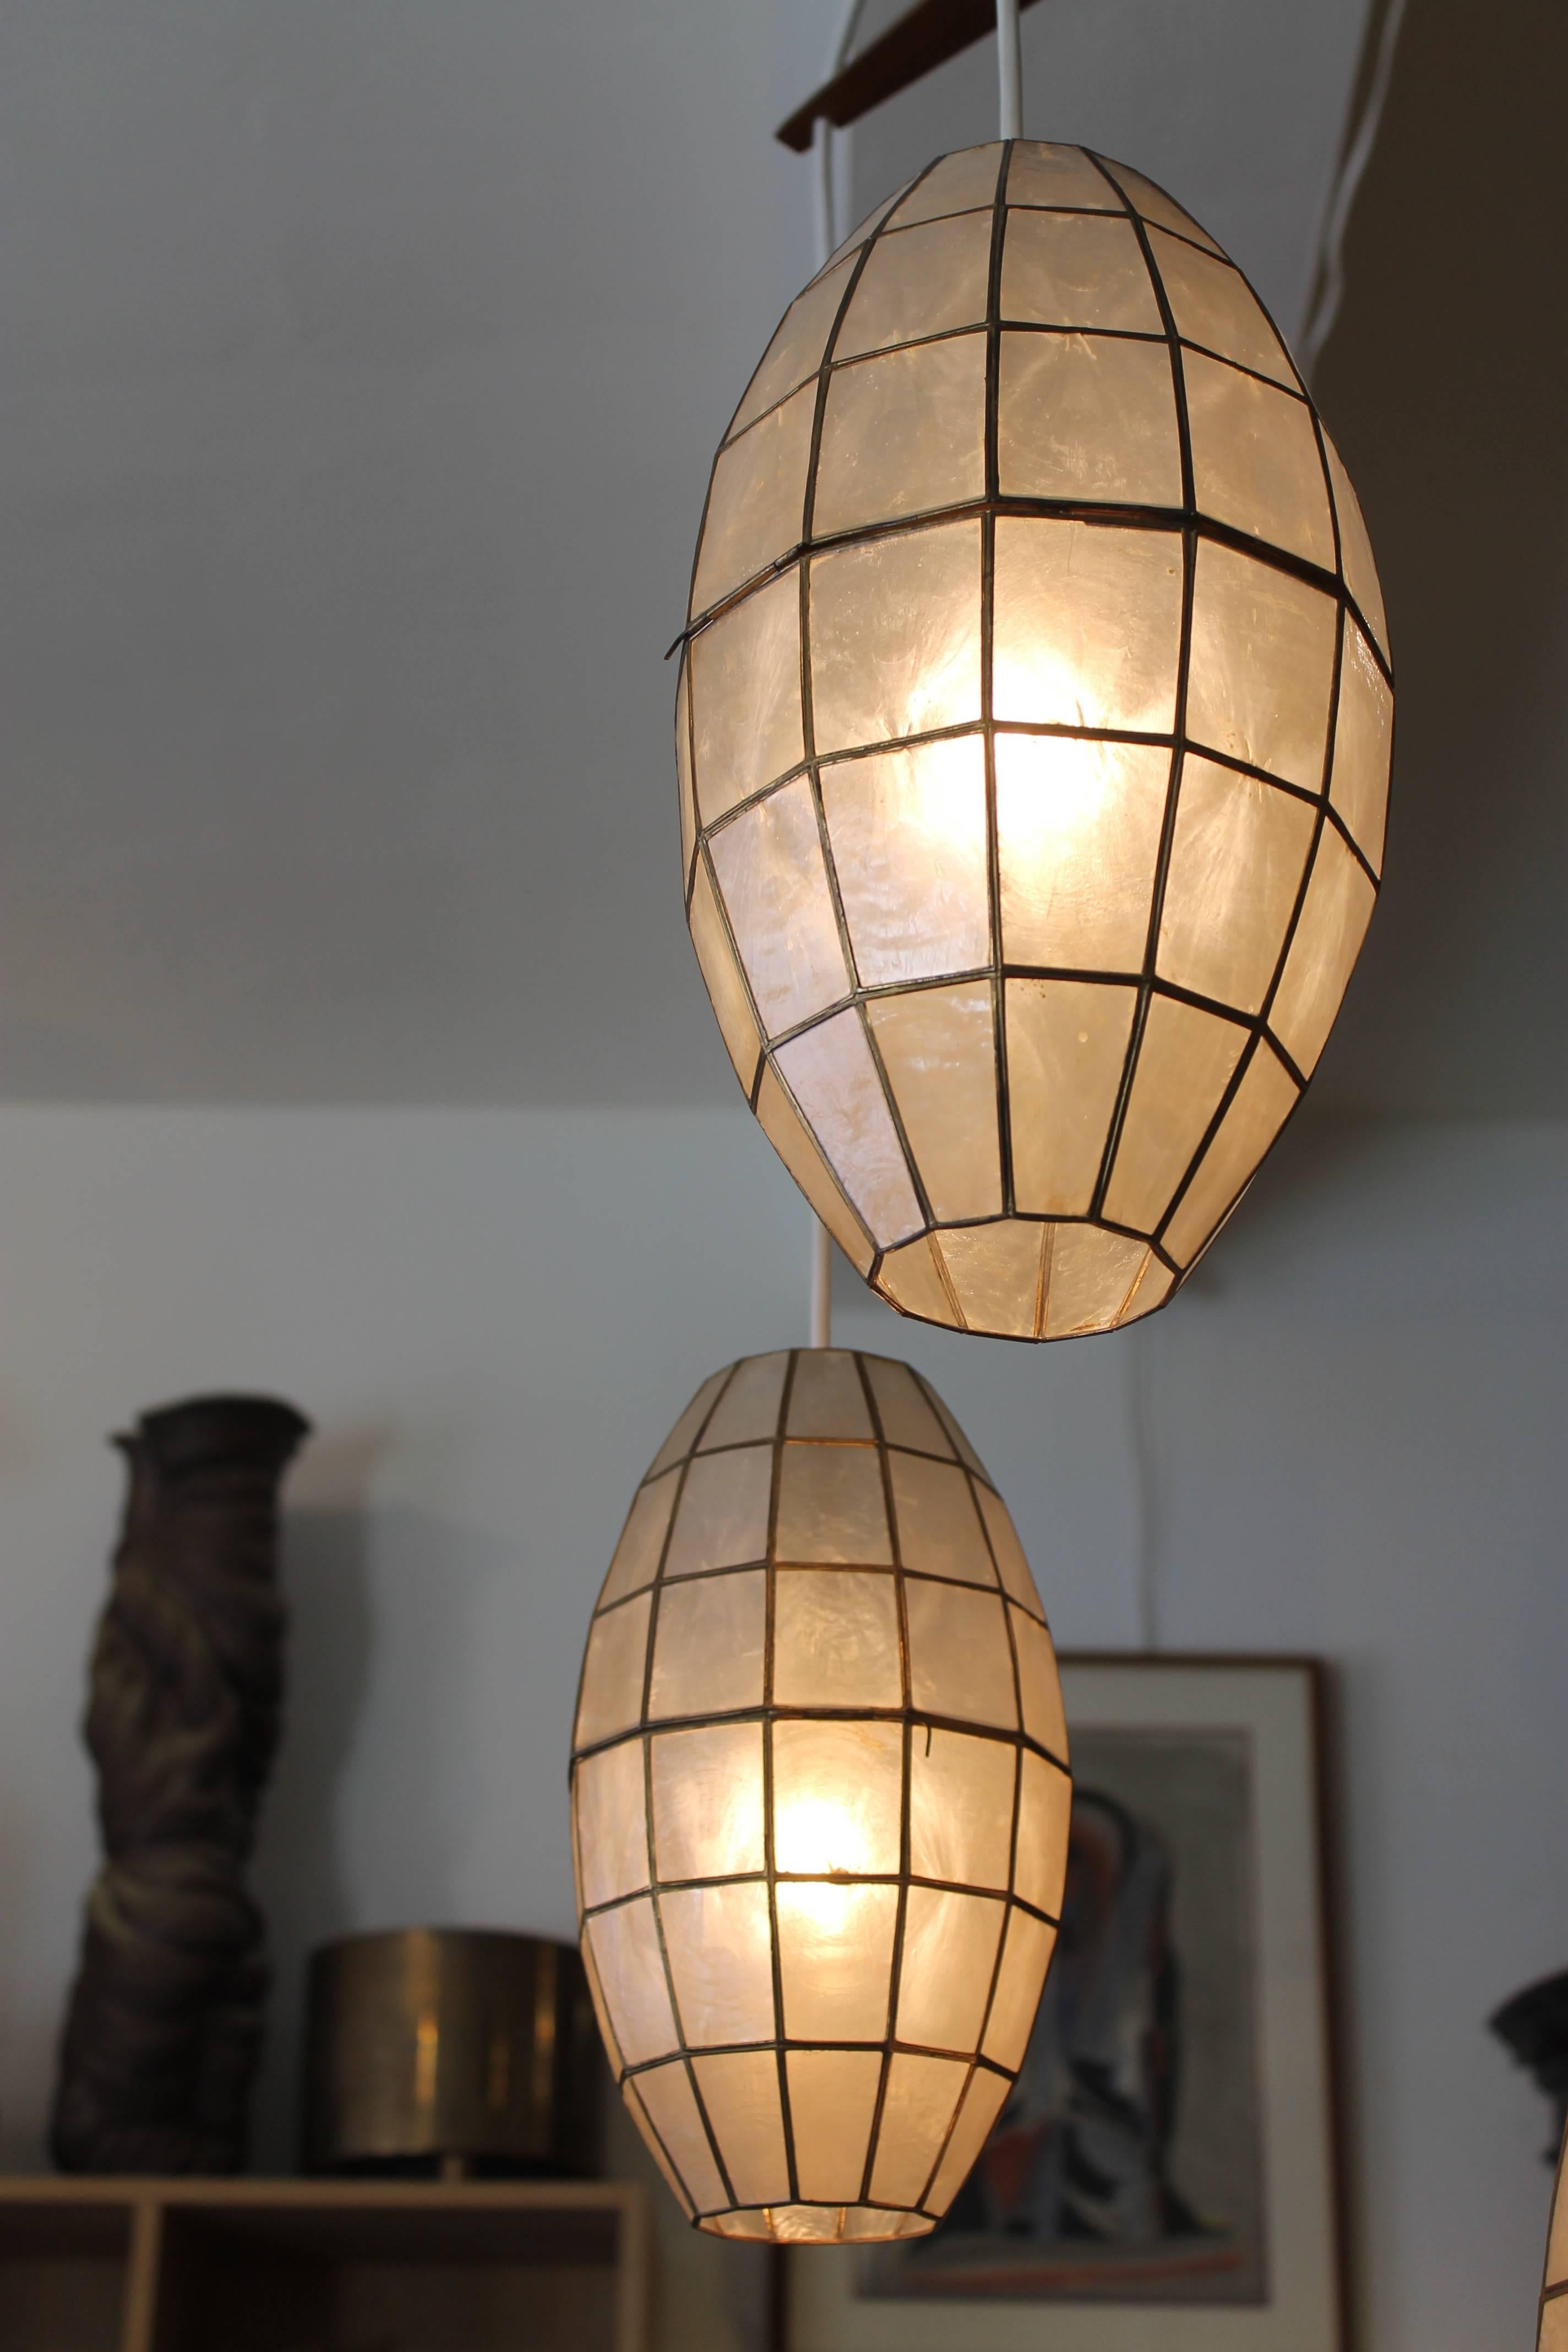 A circa 1960s hanging fixture with three cigar shaped globes made of leaded capiz shell, held apart by a solid teak three-pointed spacer. Shades vary in size, the lengths being 20